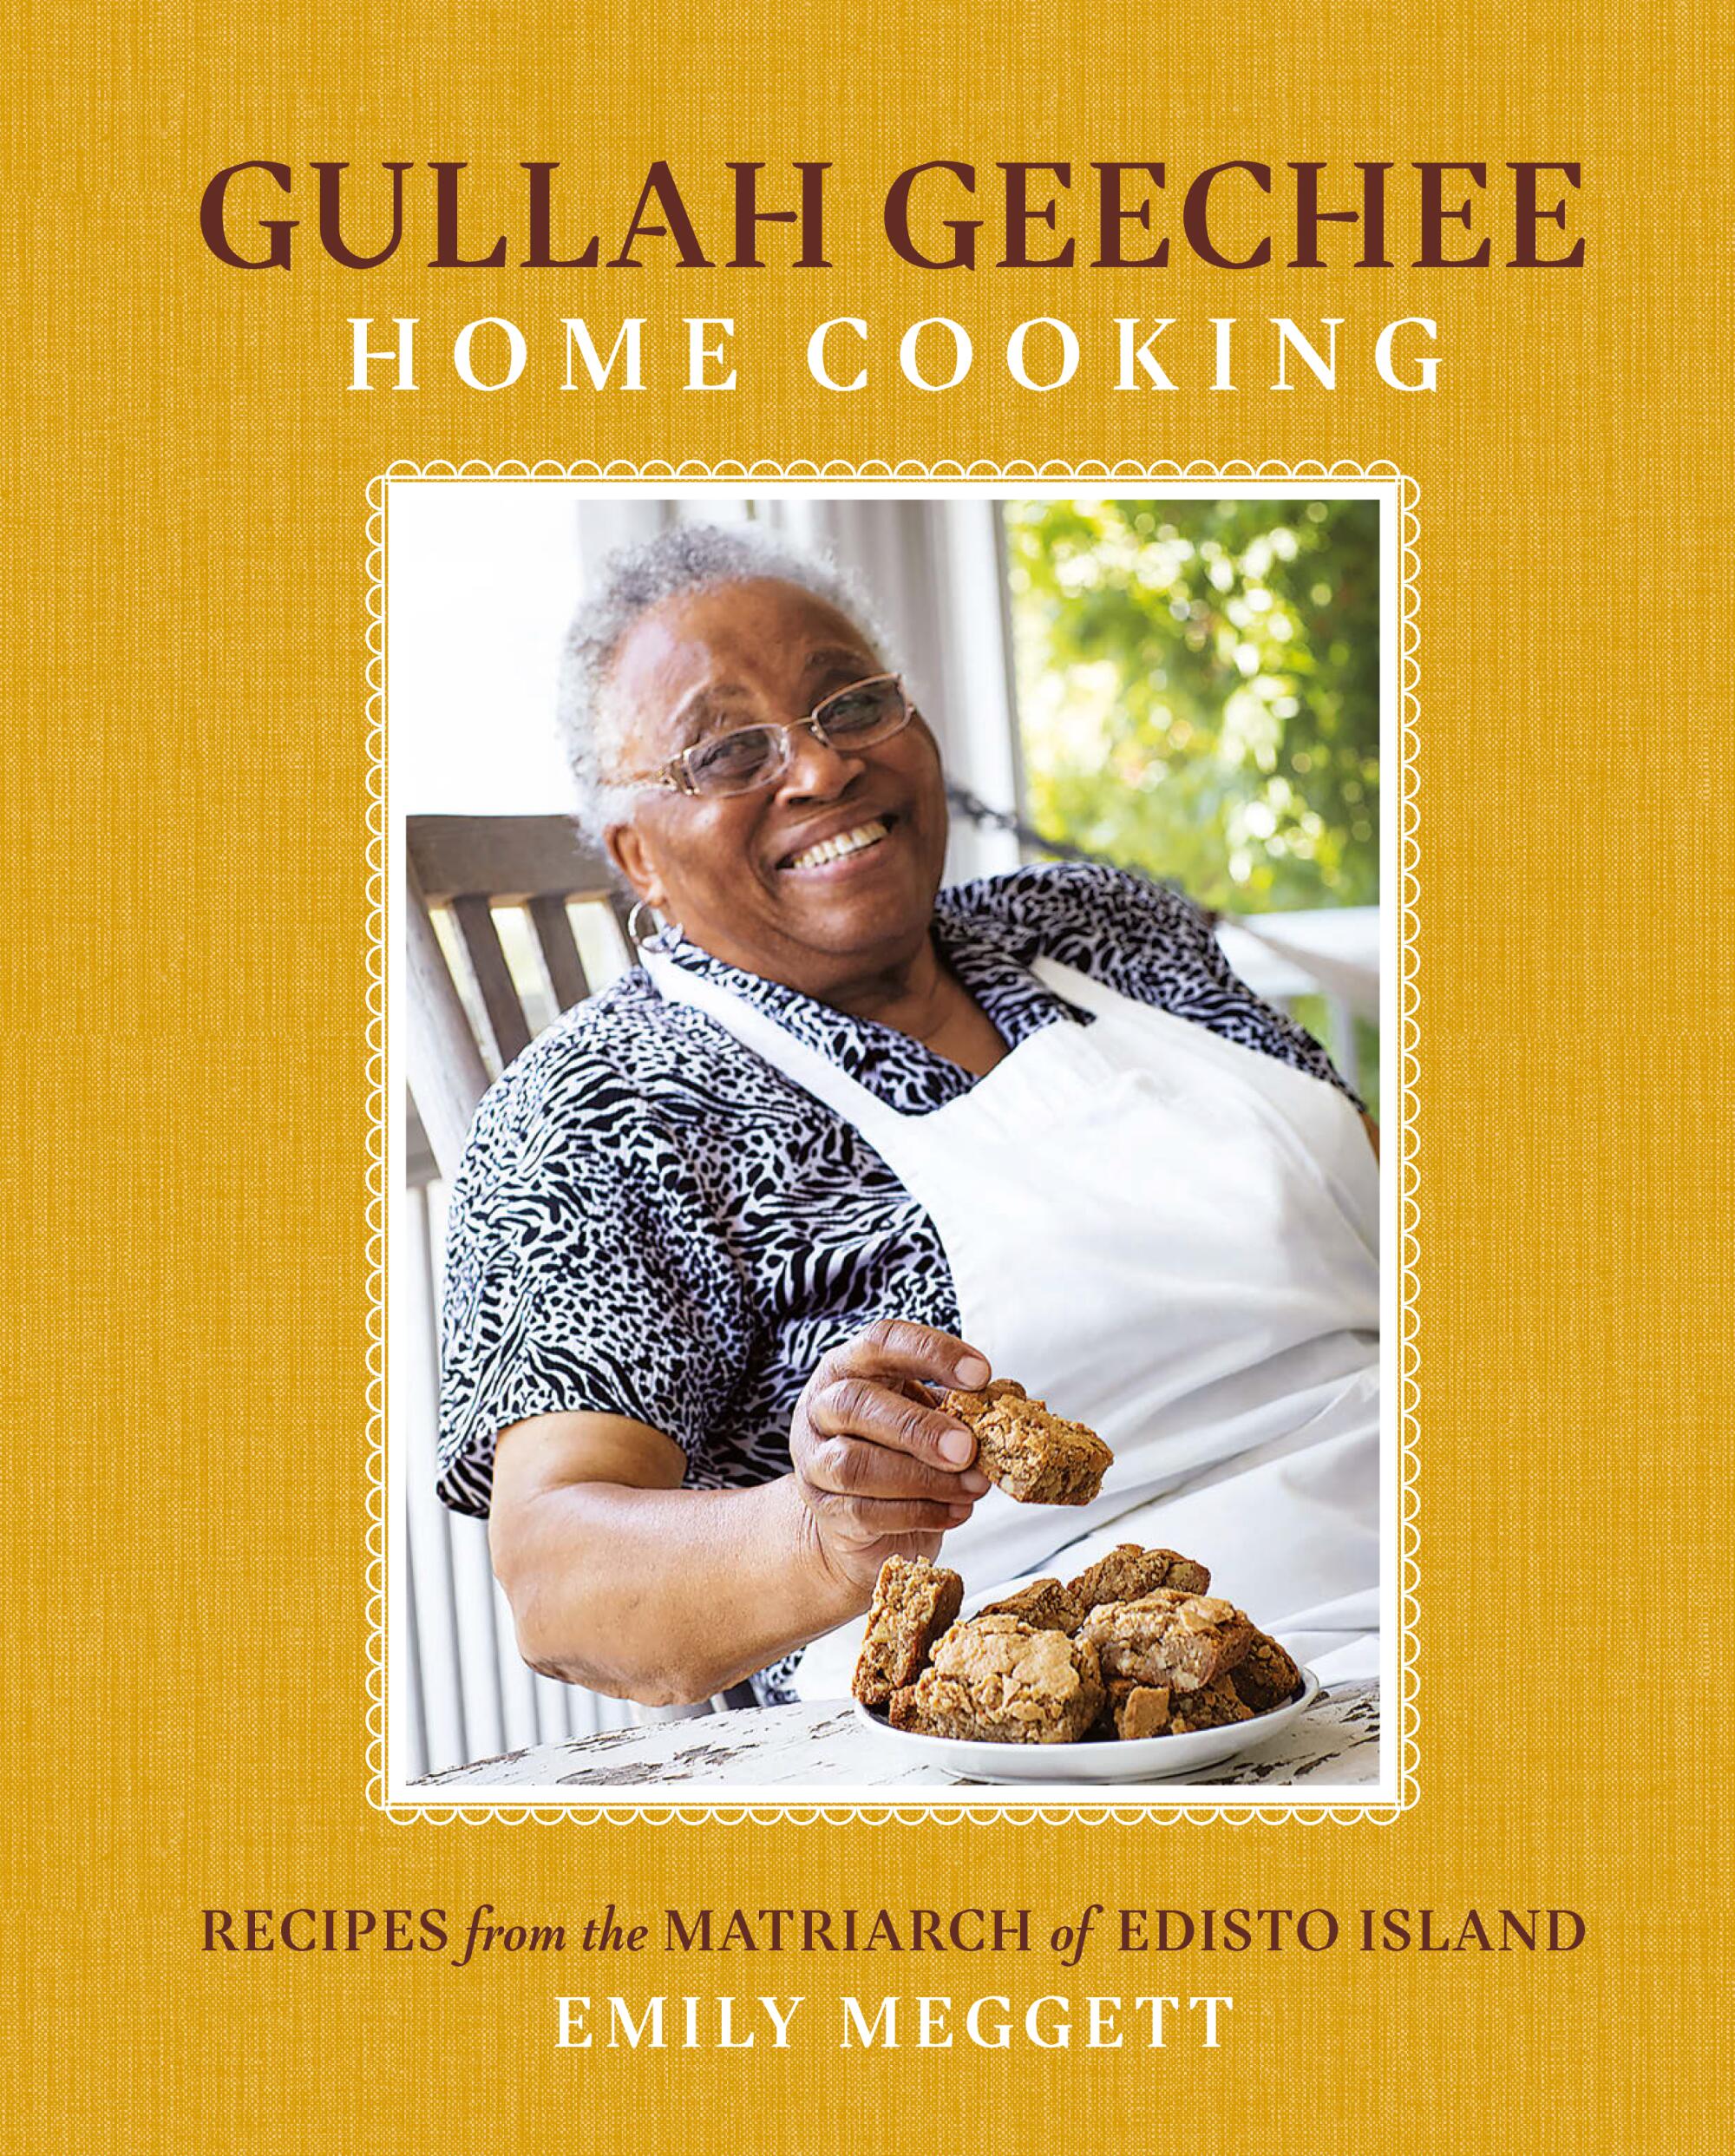 Gullah Geechee: Home Cooking - Recipes from the Matriarch of Edisto Island by Emily Meggett.